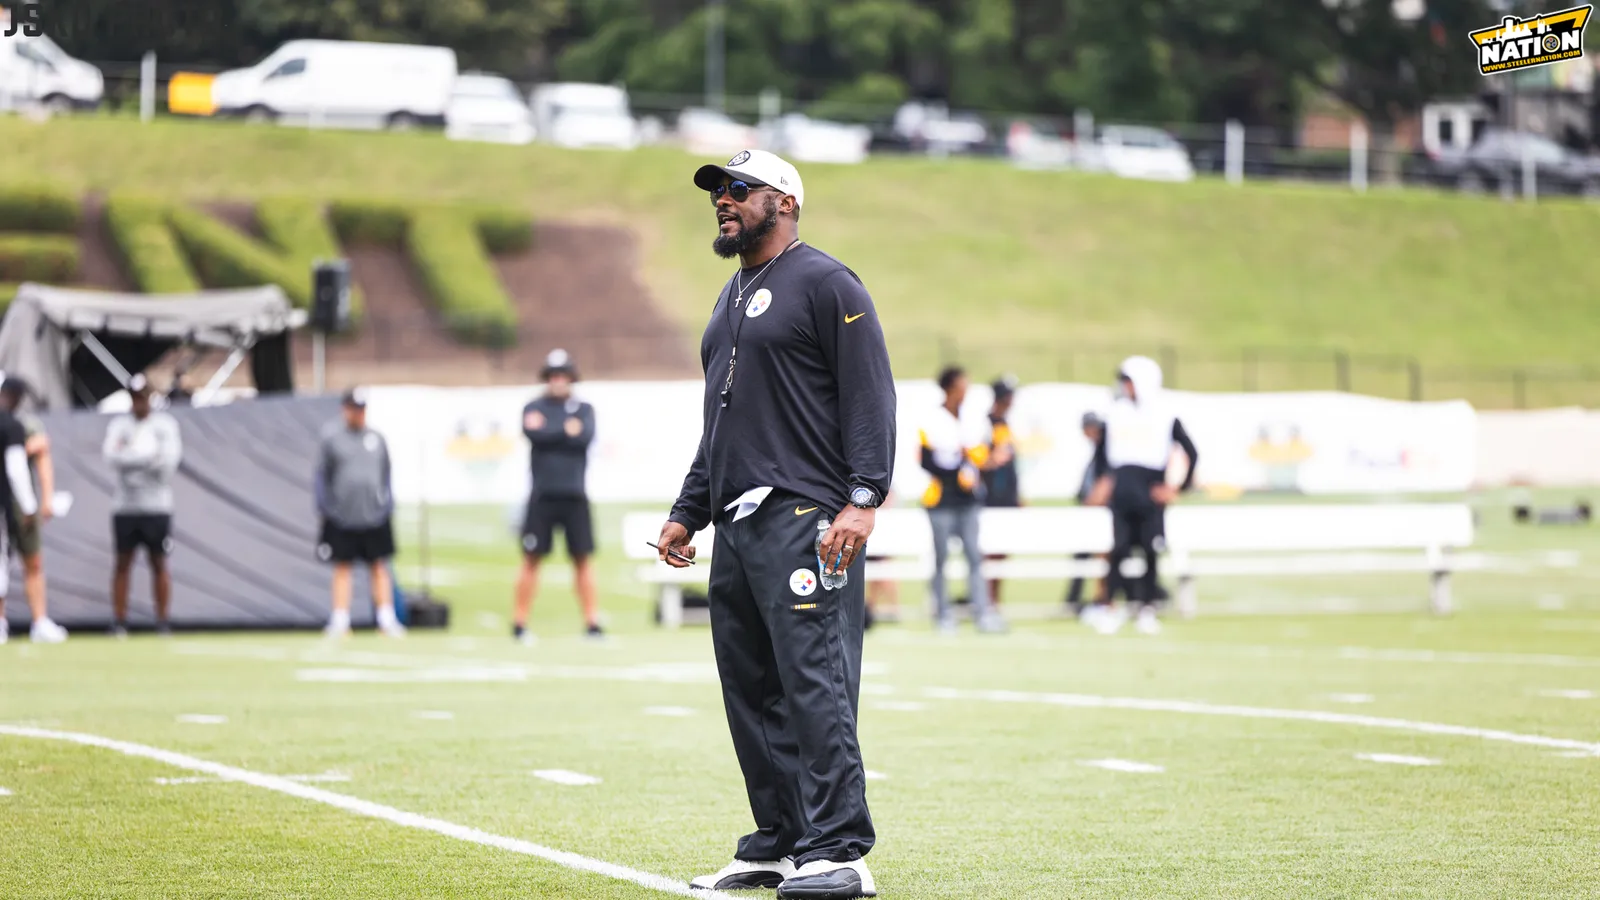 Steelers' Agonizing Wide Receiver Discipline Issues Come From "The Top" 